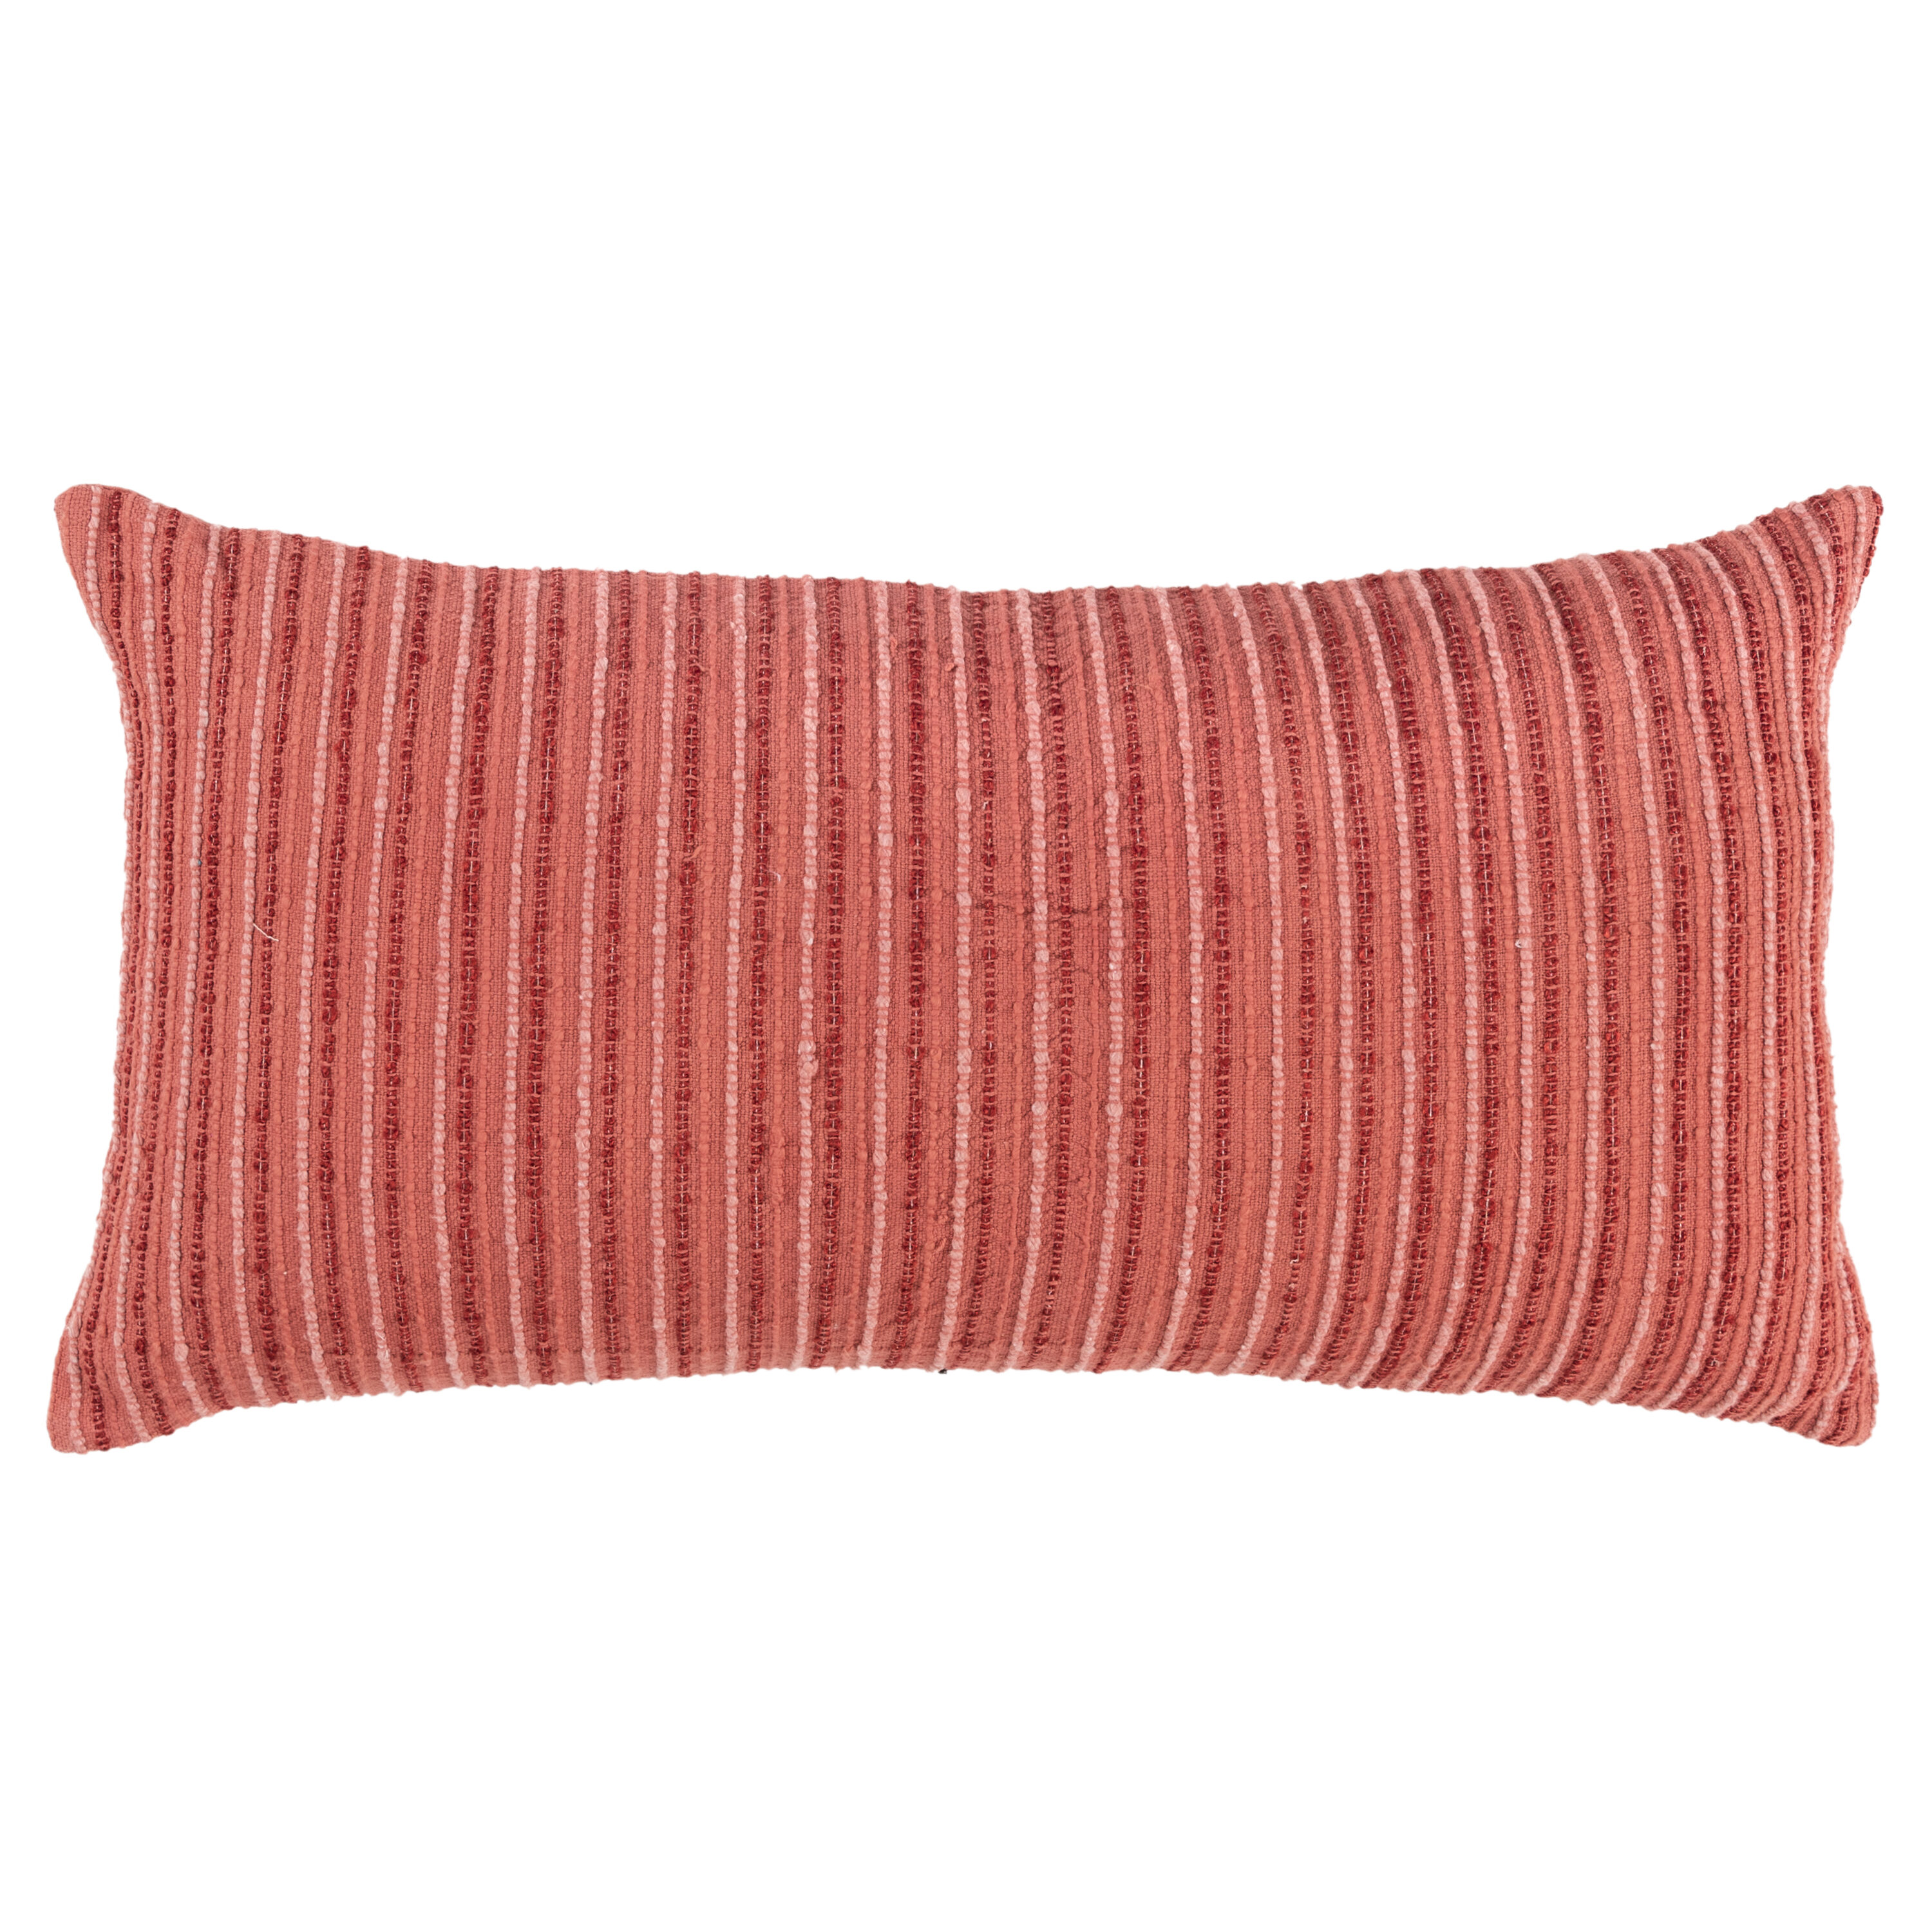 Poly Filled Pillow 14-in X 26-in Terra Cotta 100% Cotton Indoor Decorative Pillow in Red | - Rizzy Home PILT20188CQ001426